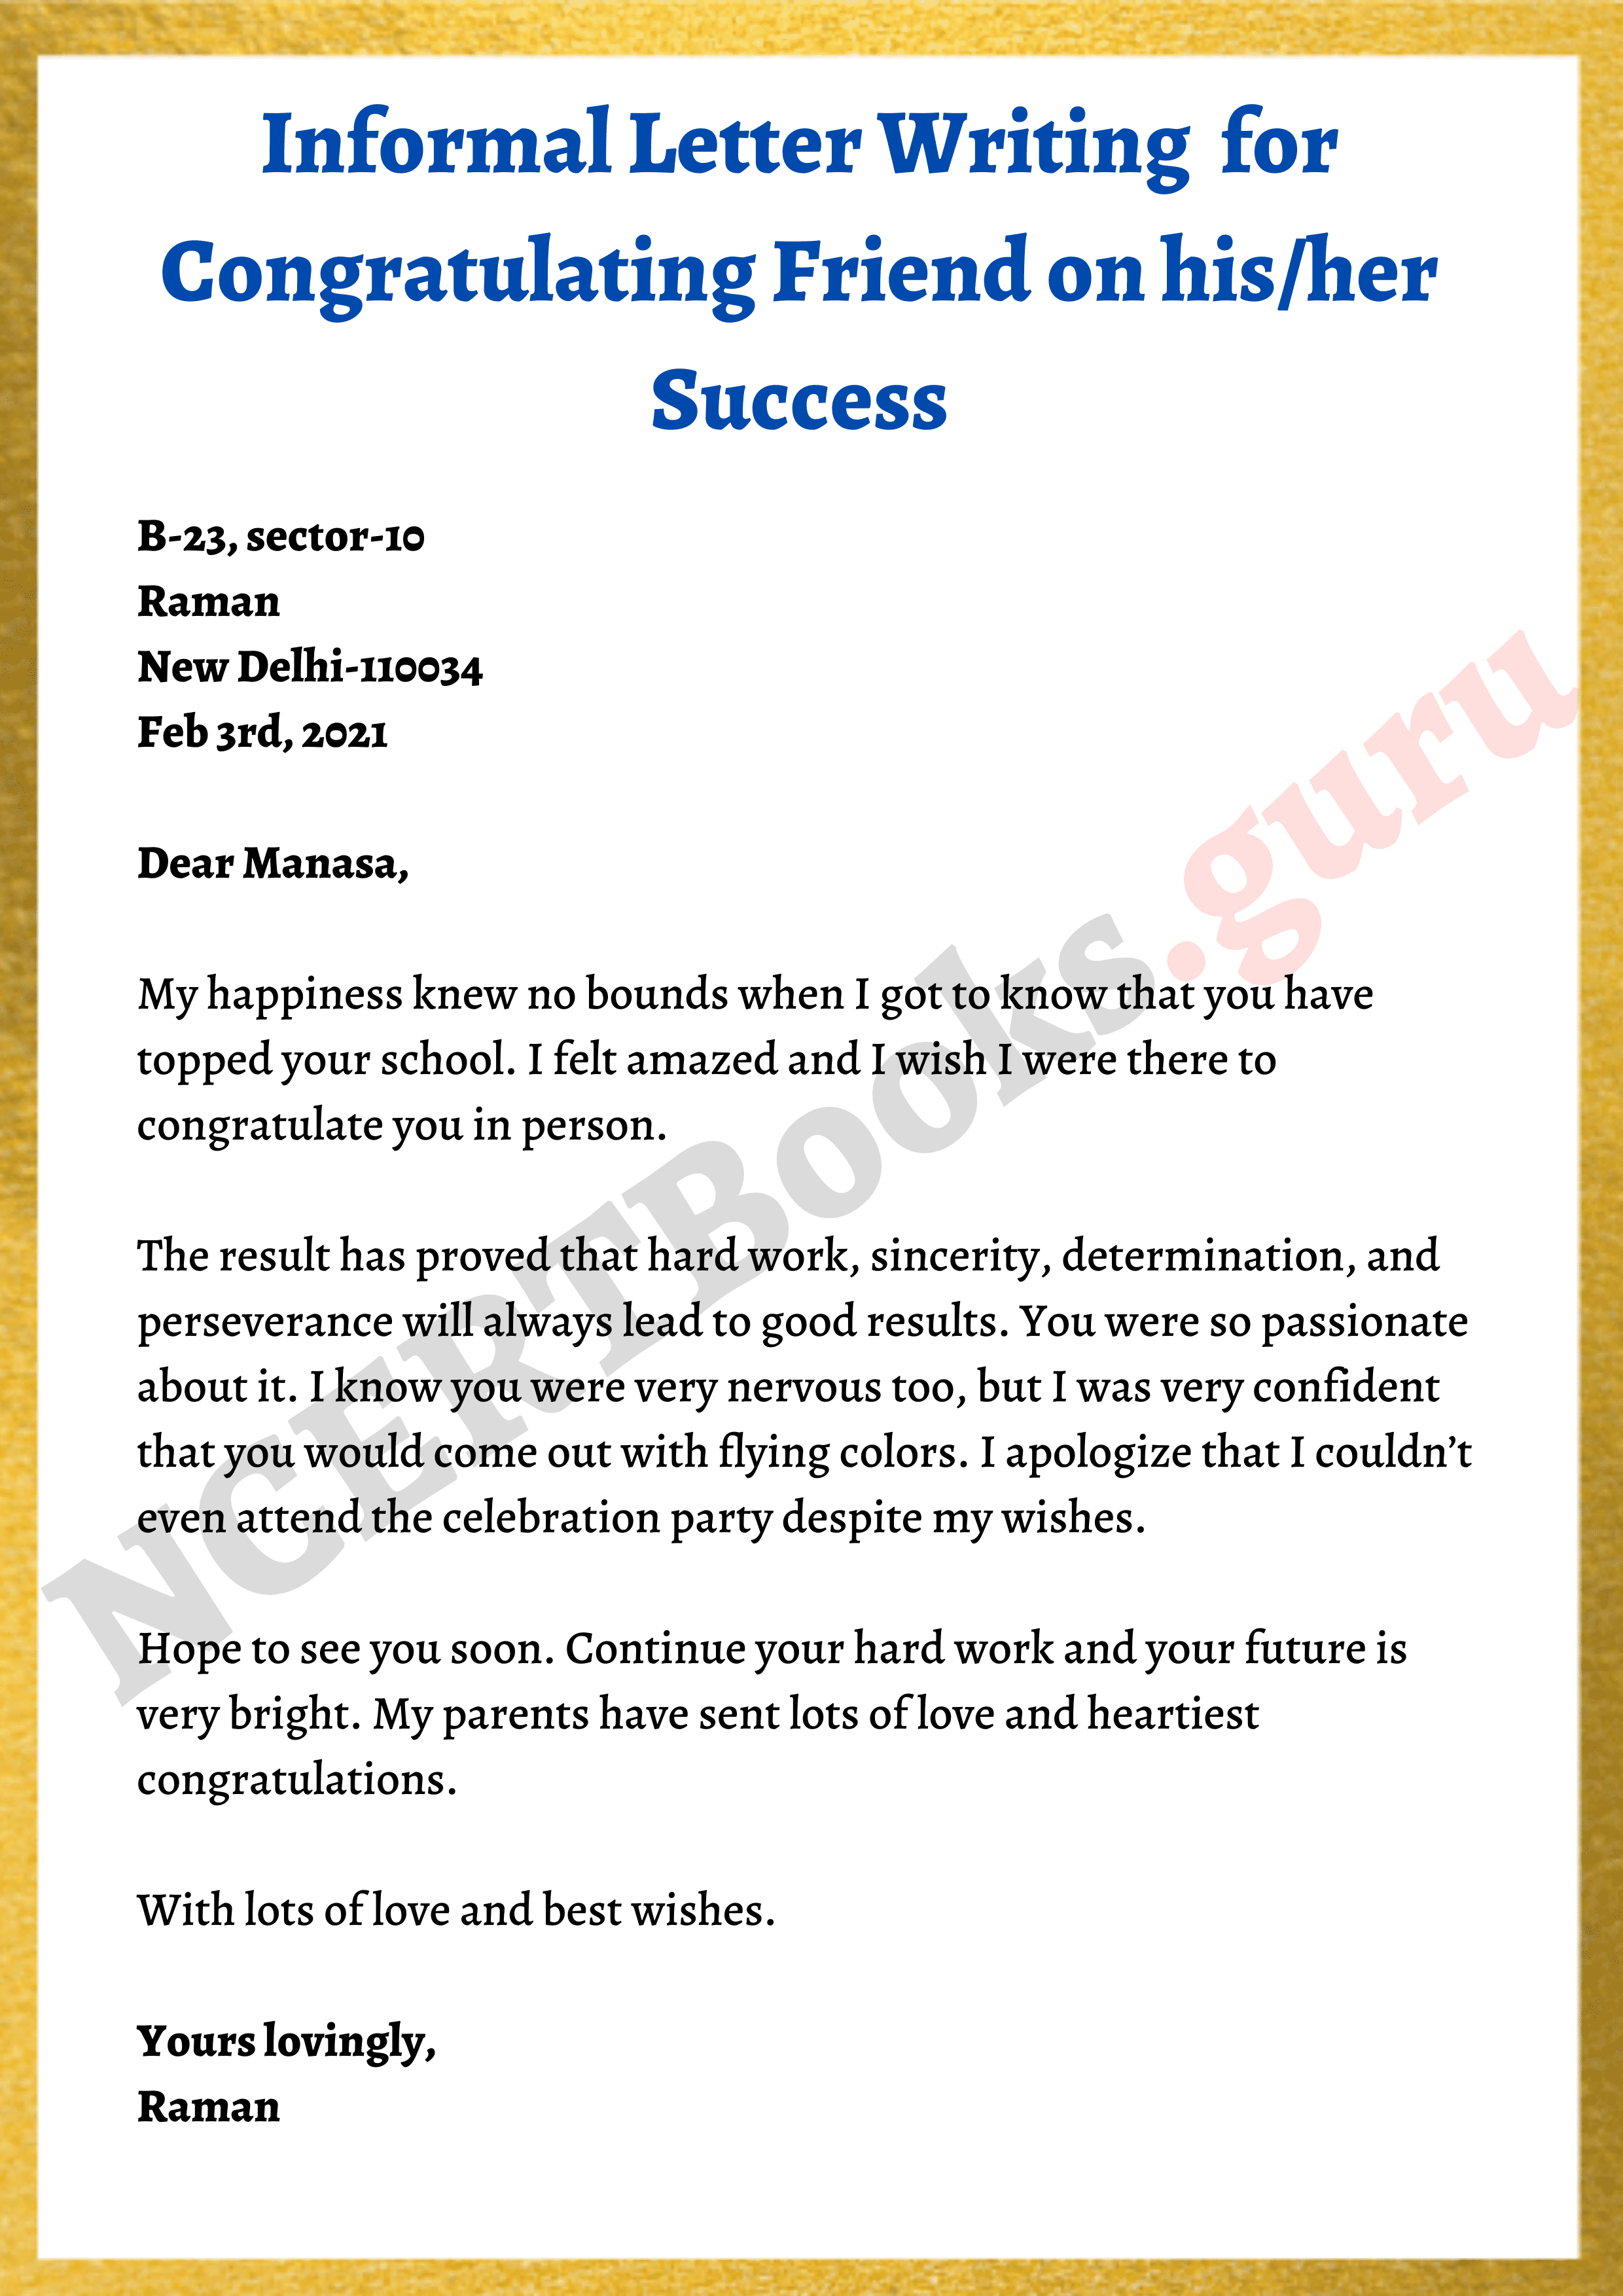 Informal Letter Writing Sample for Congratulating Friend on their Success